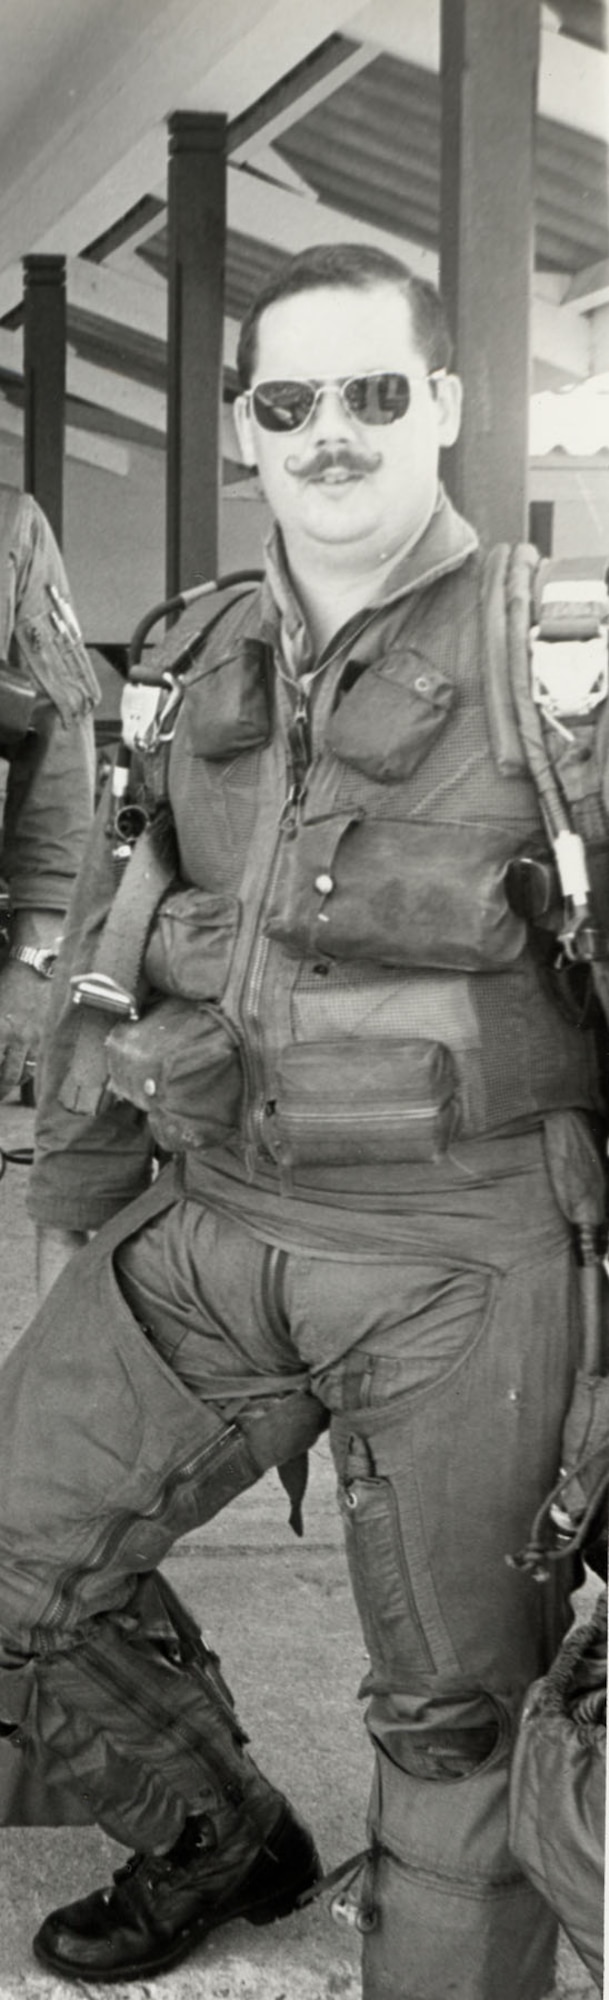 Capt. King preparing to leave on a mission. He is wearing the flight clothing now on display. (U.S. Air Force photo)